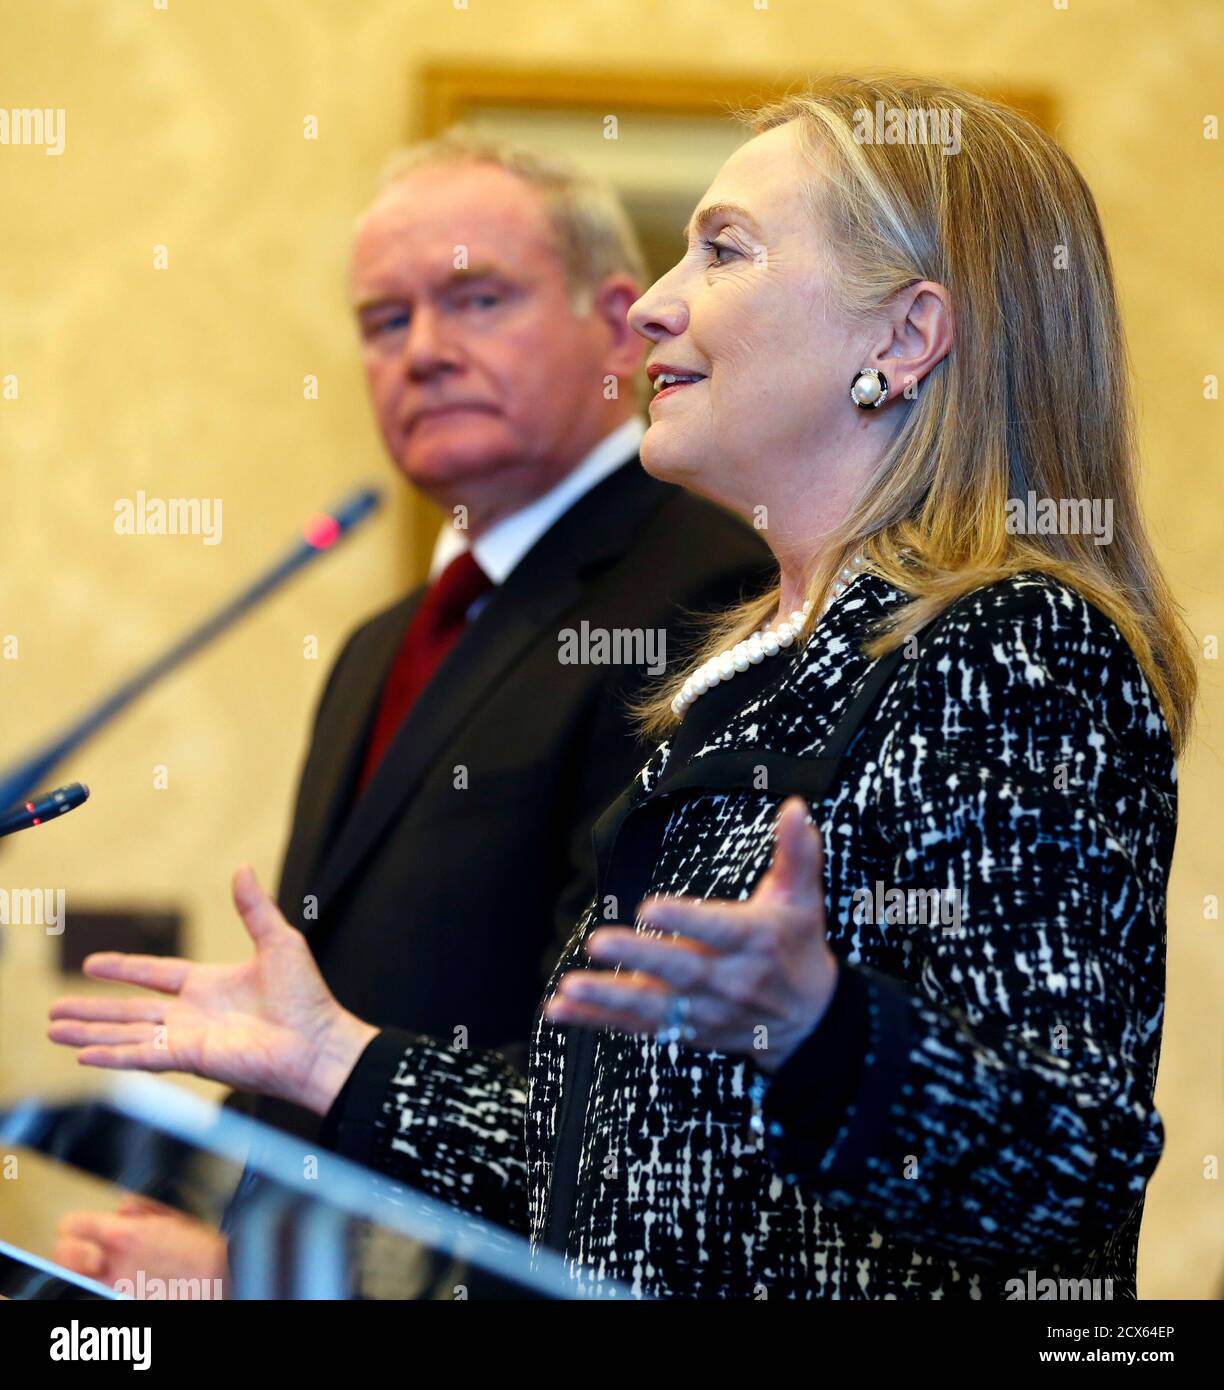 U.S. Secretary of  State Hillary Clinton speaks during a news conference as Northern Ireland's Deputy First Minister Martin McGuinness listens at Stormont Castle in Belfast December 7, 2012. Clinton travelled to Northern Ireland on Friday to lend her support to the British province's fragile peace, the frailty of which was underlined by overnight rioting on the eve of her visit and the seizure of a bomb. REUTERS/Kevin Lamarque (NORTHERN IRELAND - Tags: POLITICS) Stock Photo